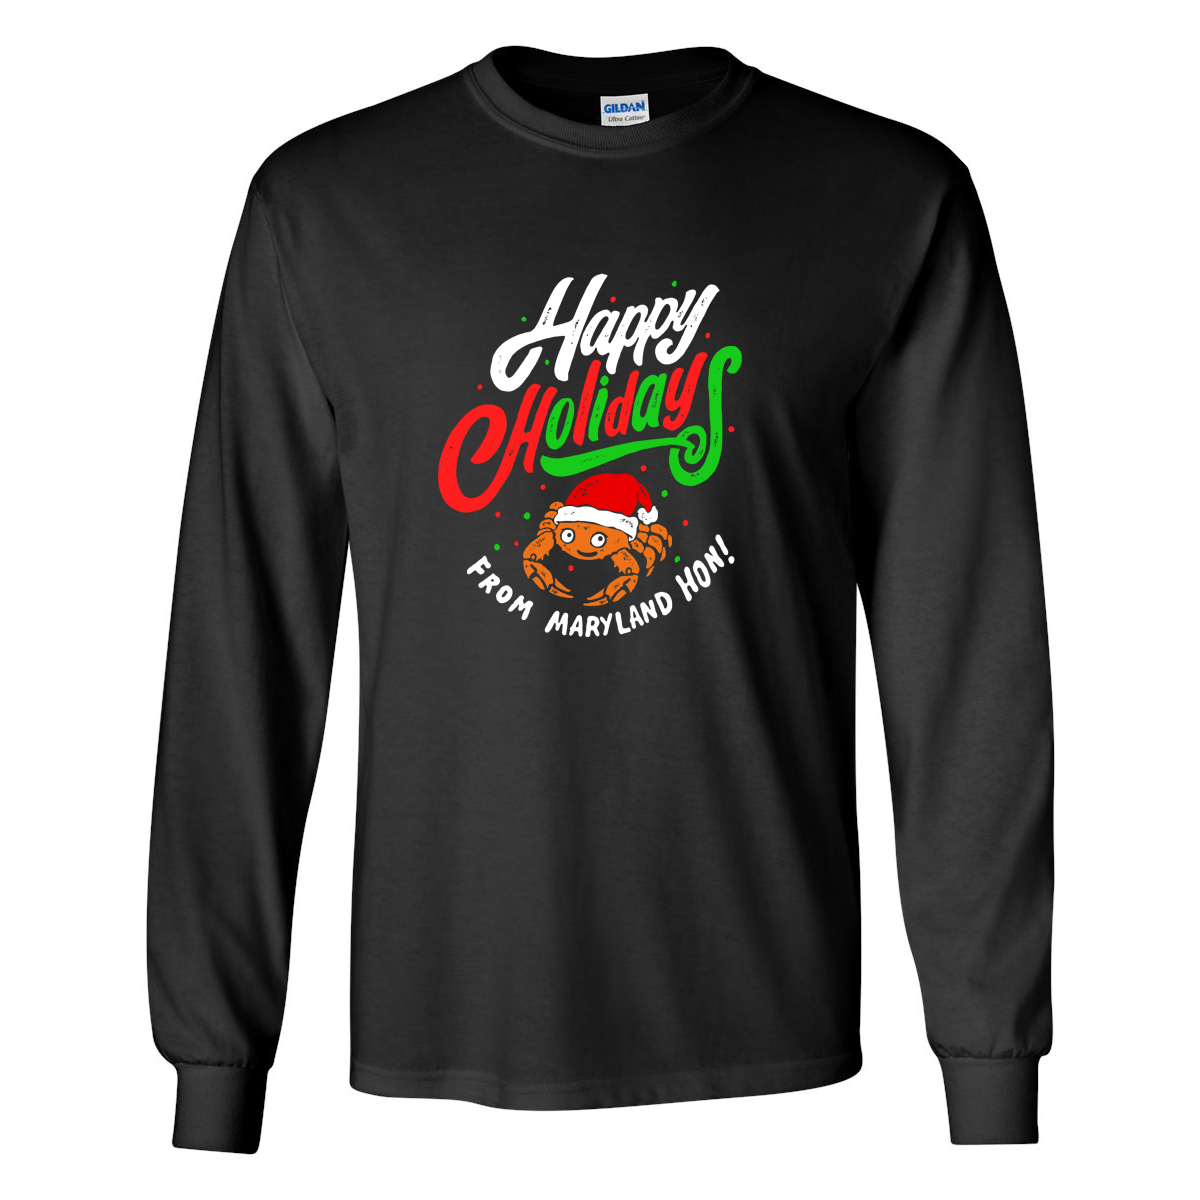 *PRE-ORDER* Happy Holidays from Maryland Hon! (Black) / Long Sleeve Shirt (Estimated Ship Date: 12/15) - Route One Apparel